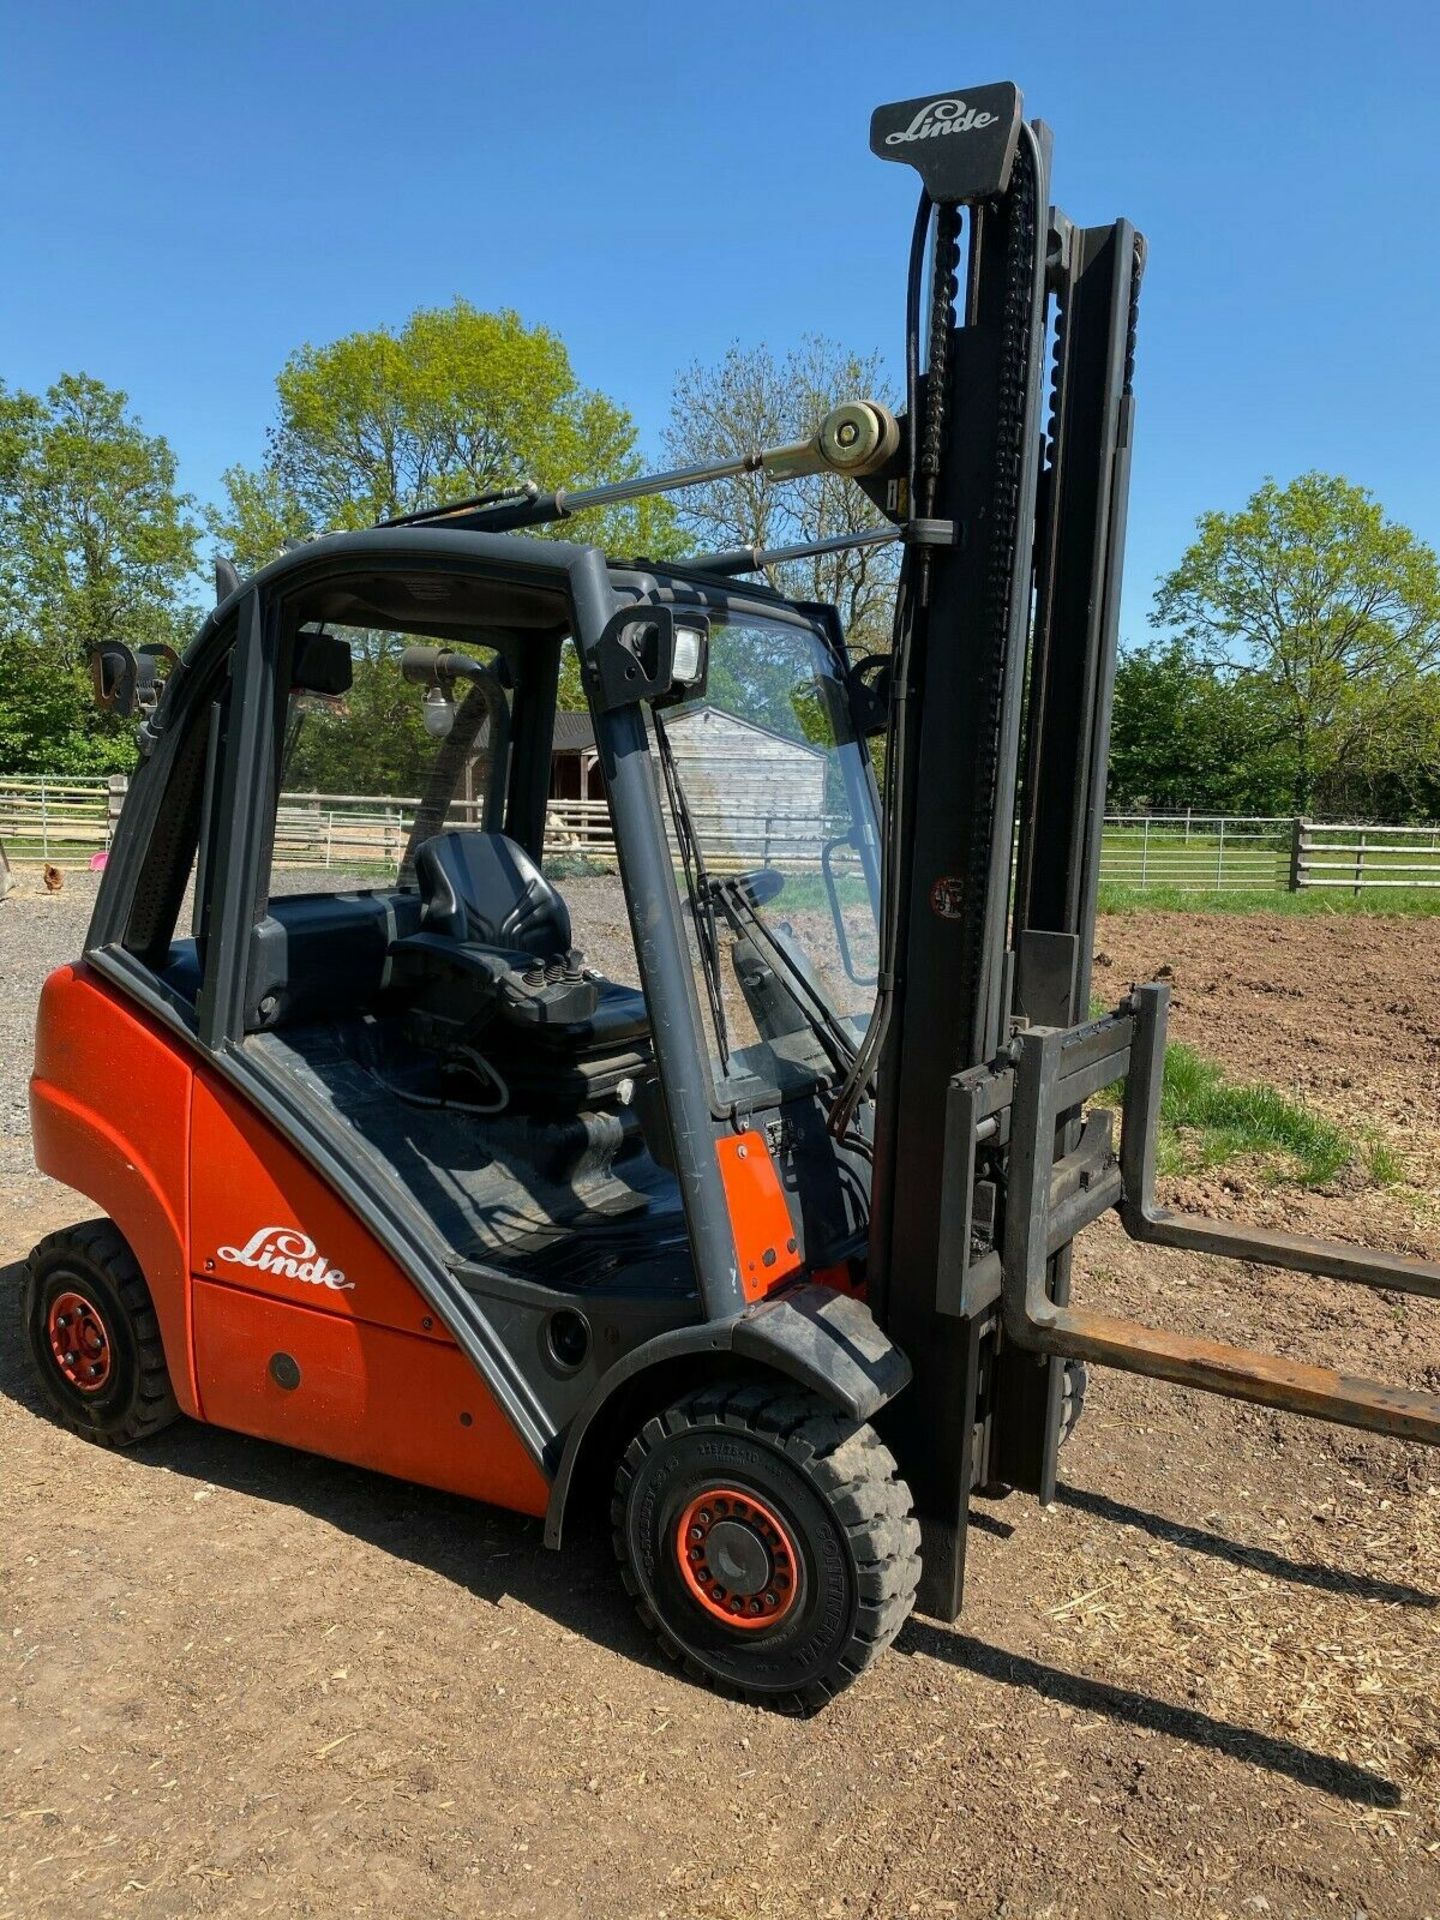 LINDE 2.5 TON, MODEL: H25D, 3.7 METRE LIFT, DUPLEX, SIDE SHIFT, ONLY 600 HOURS FROM NEW, 1 OWNER